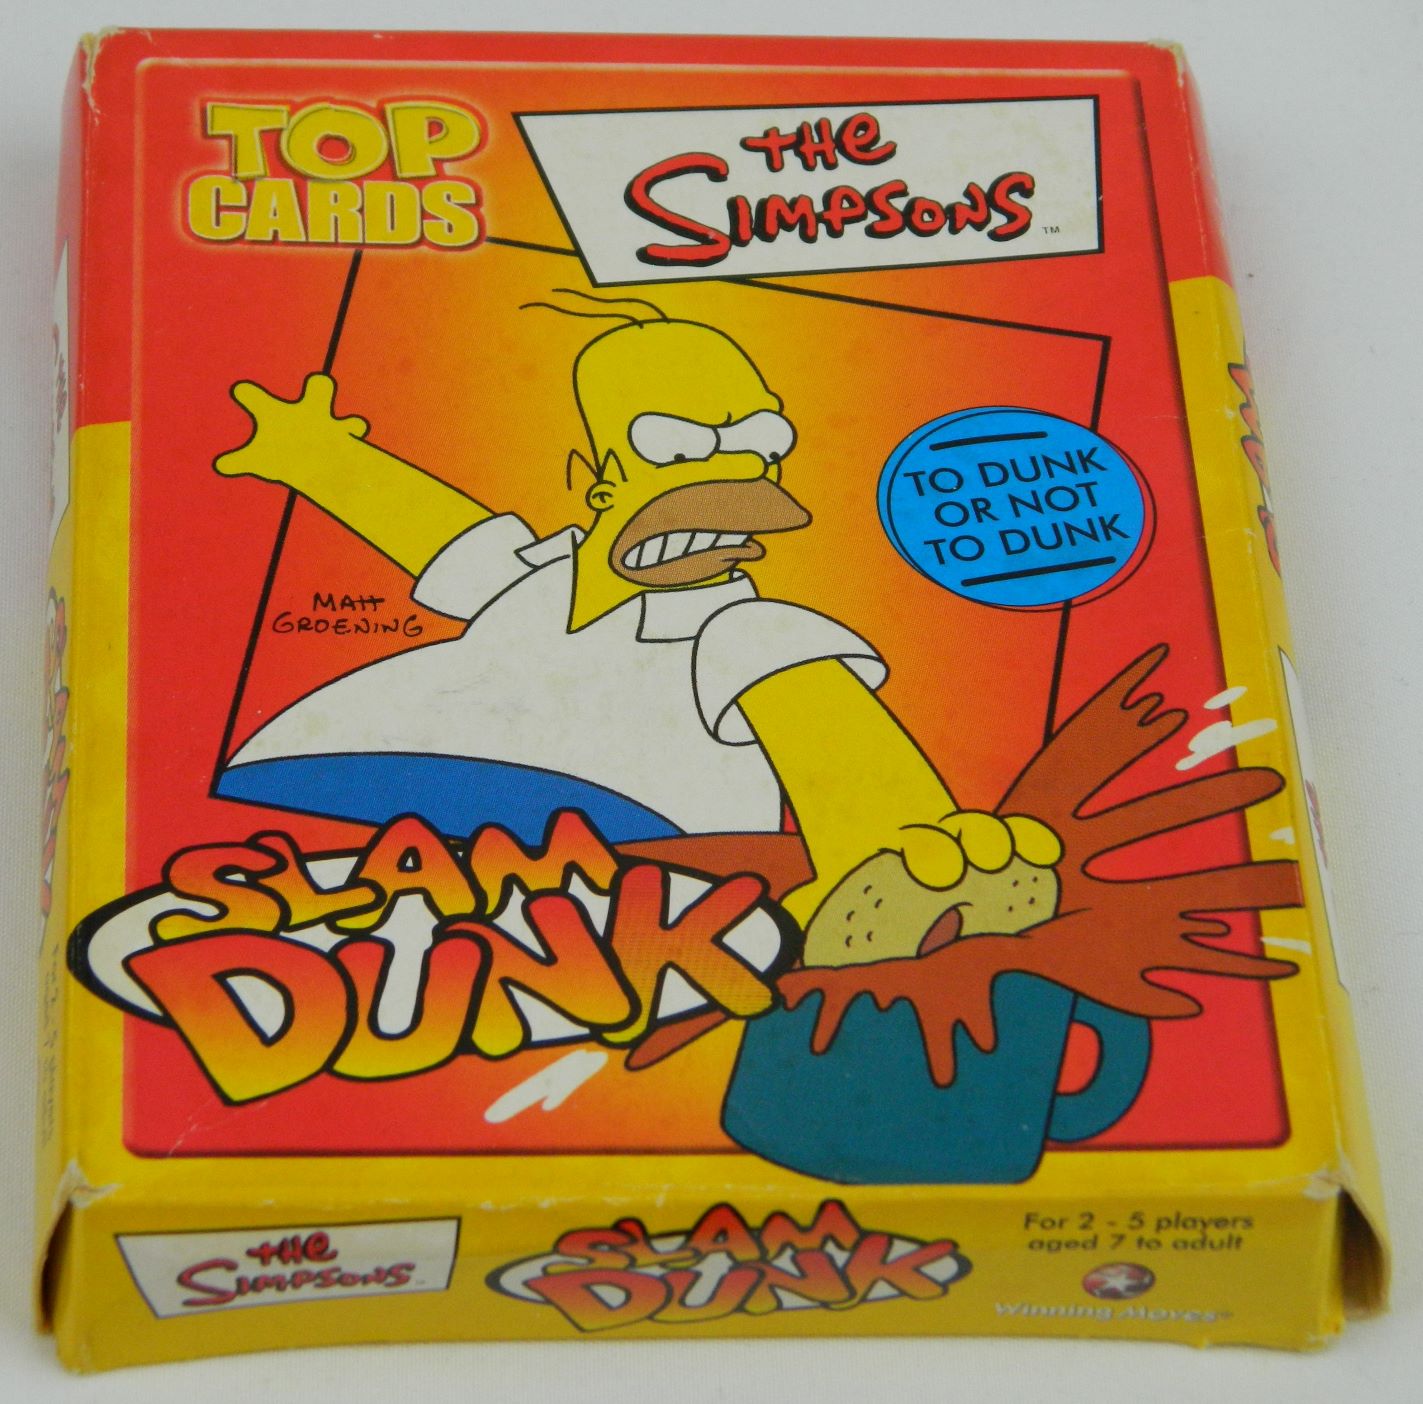 Box for The Simpsons Slam Dunk